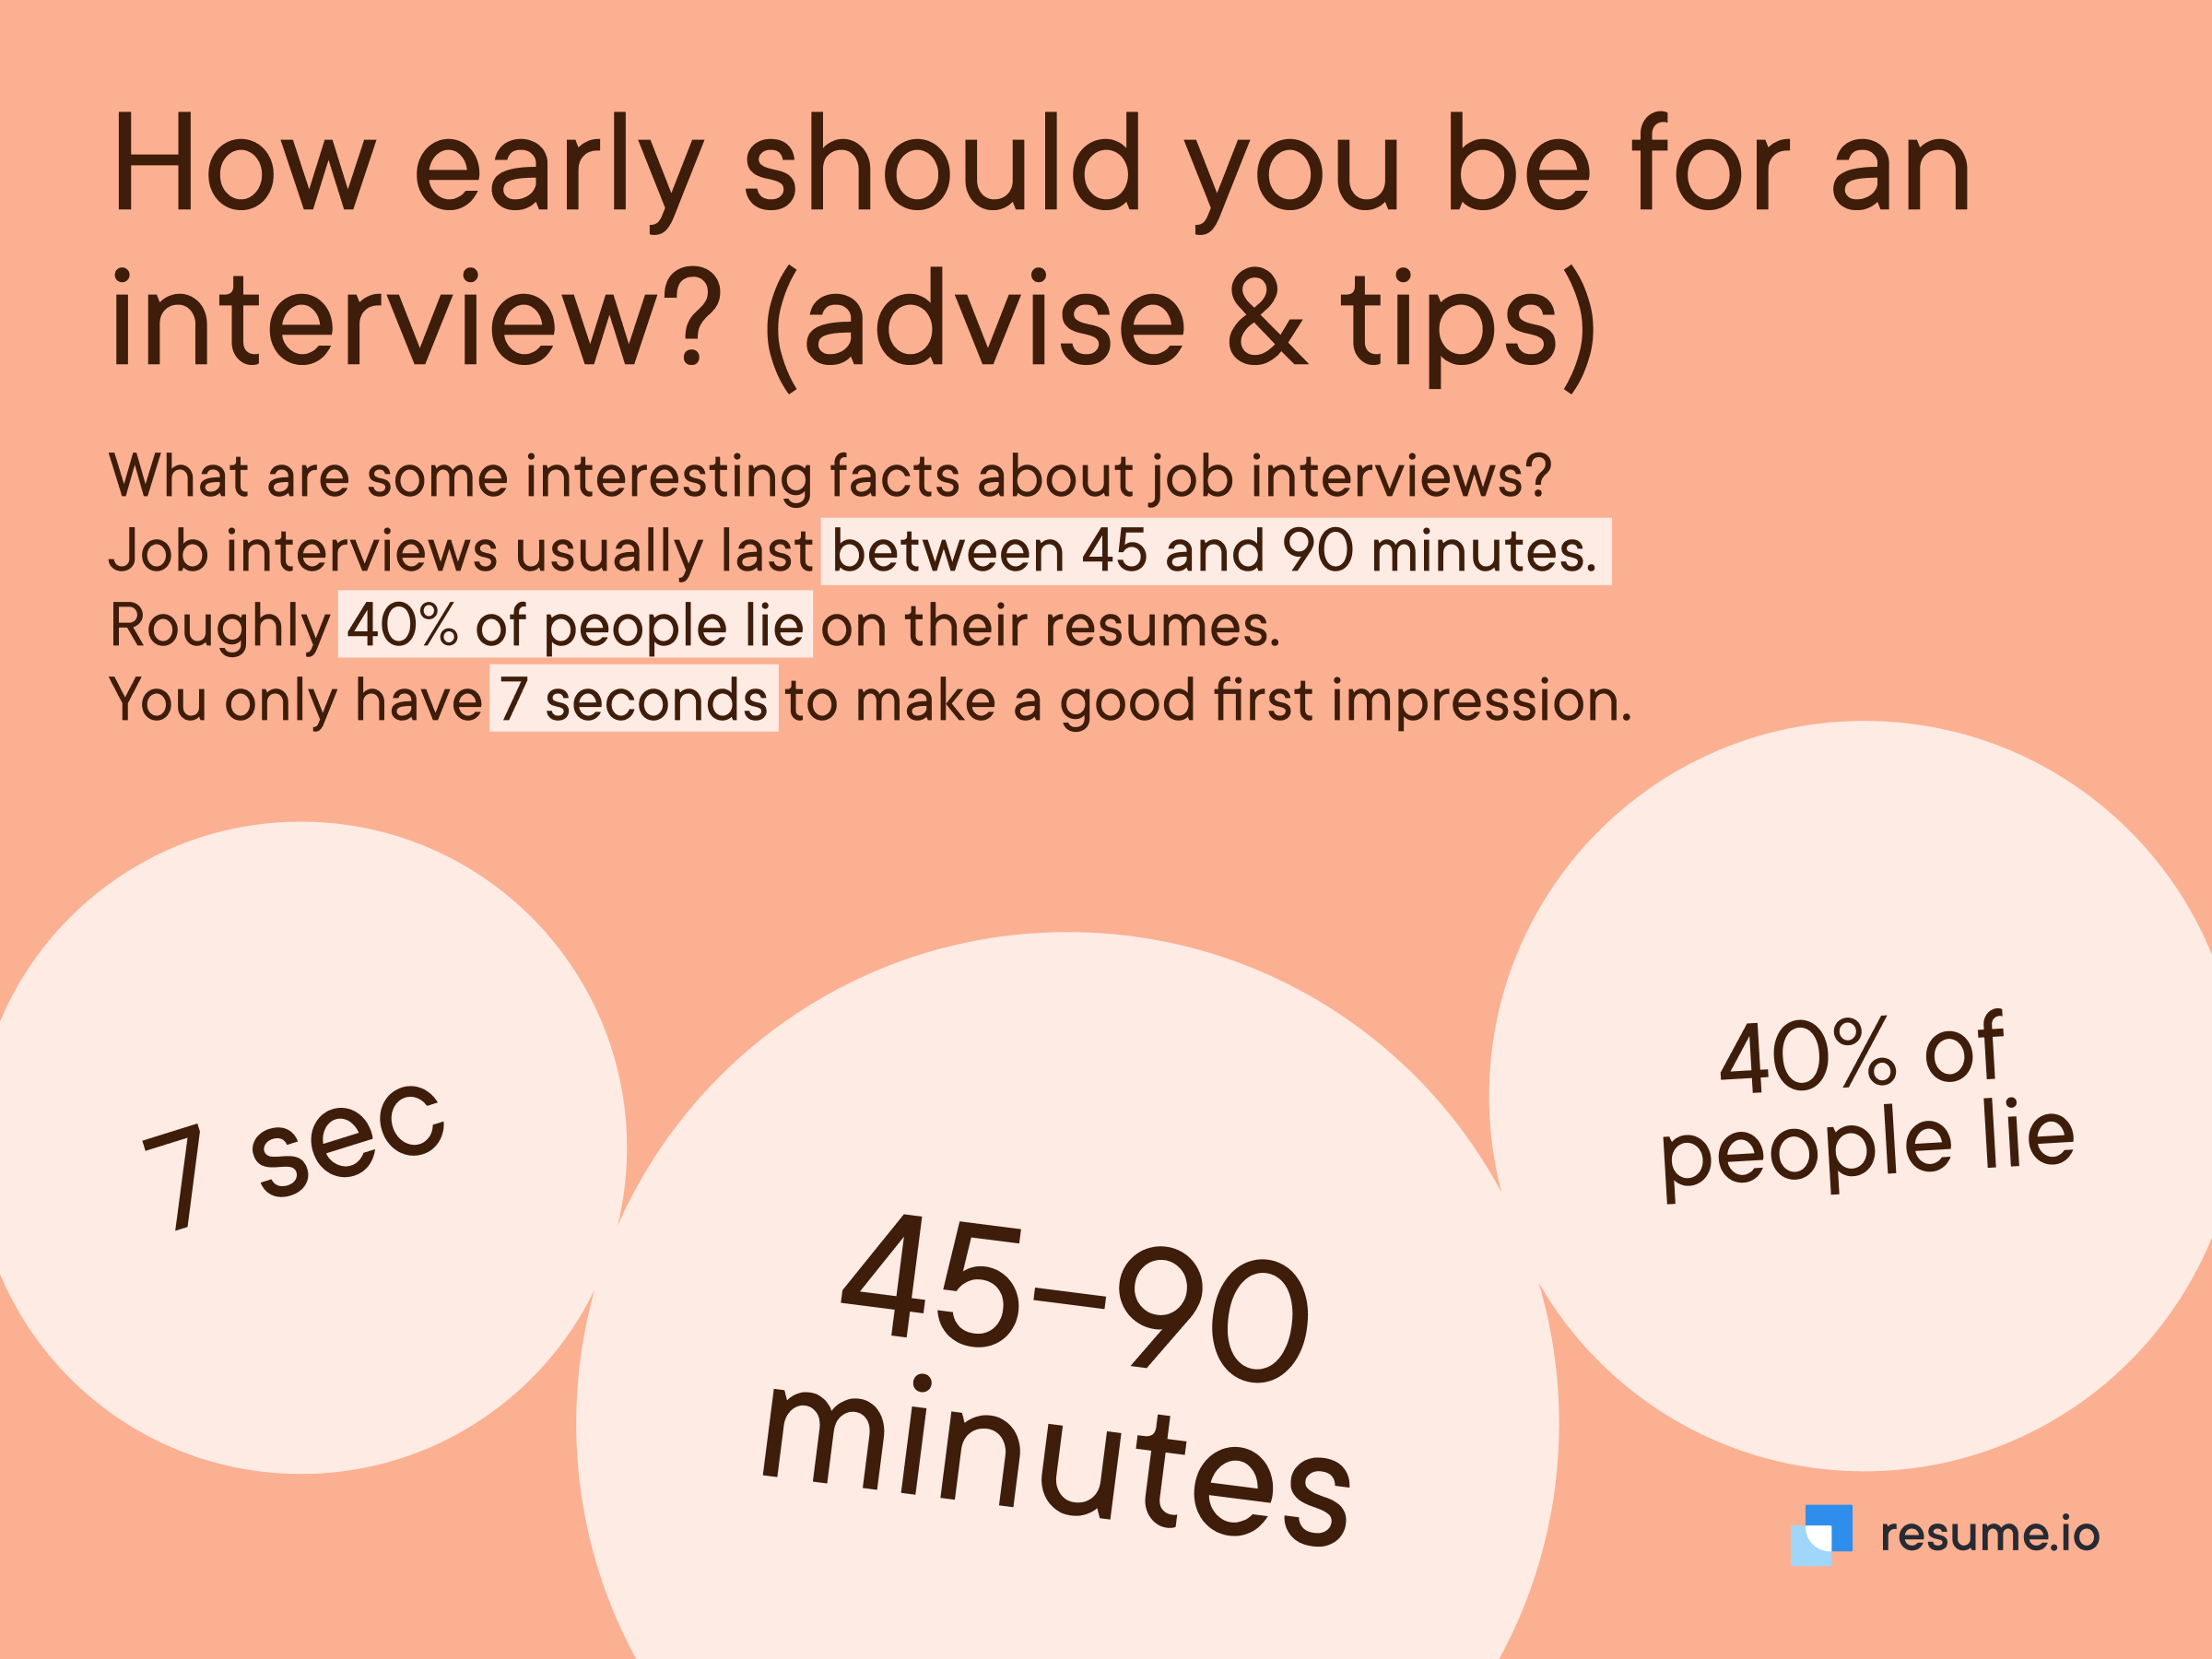 Circles with fun facts about a job interview